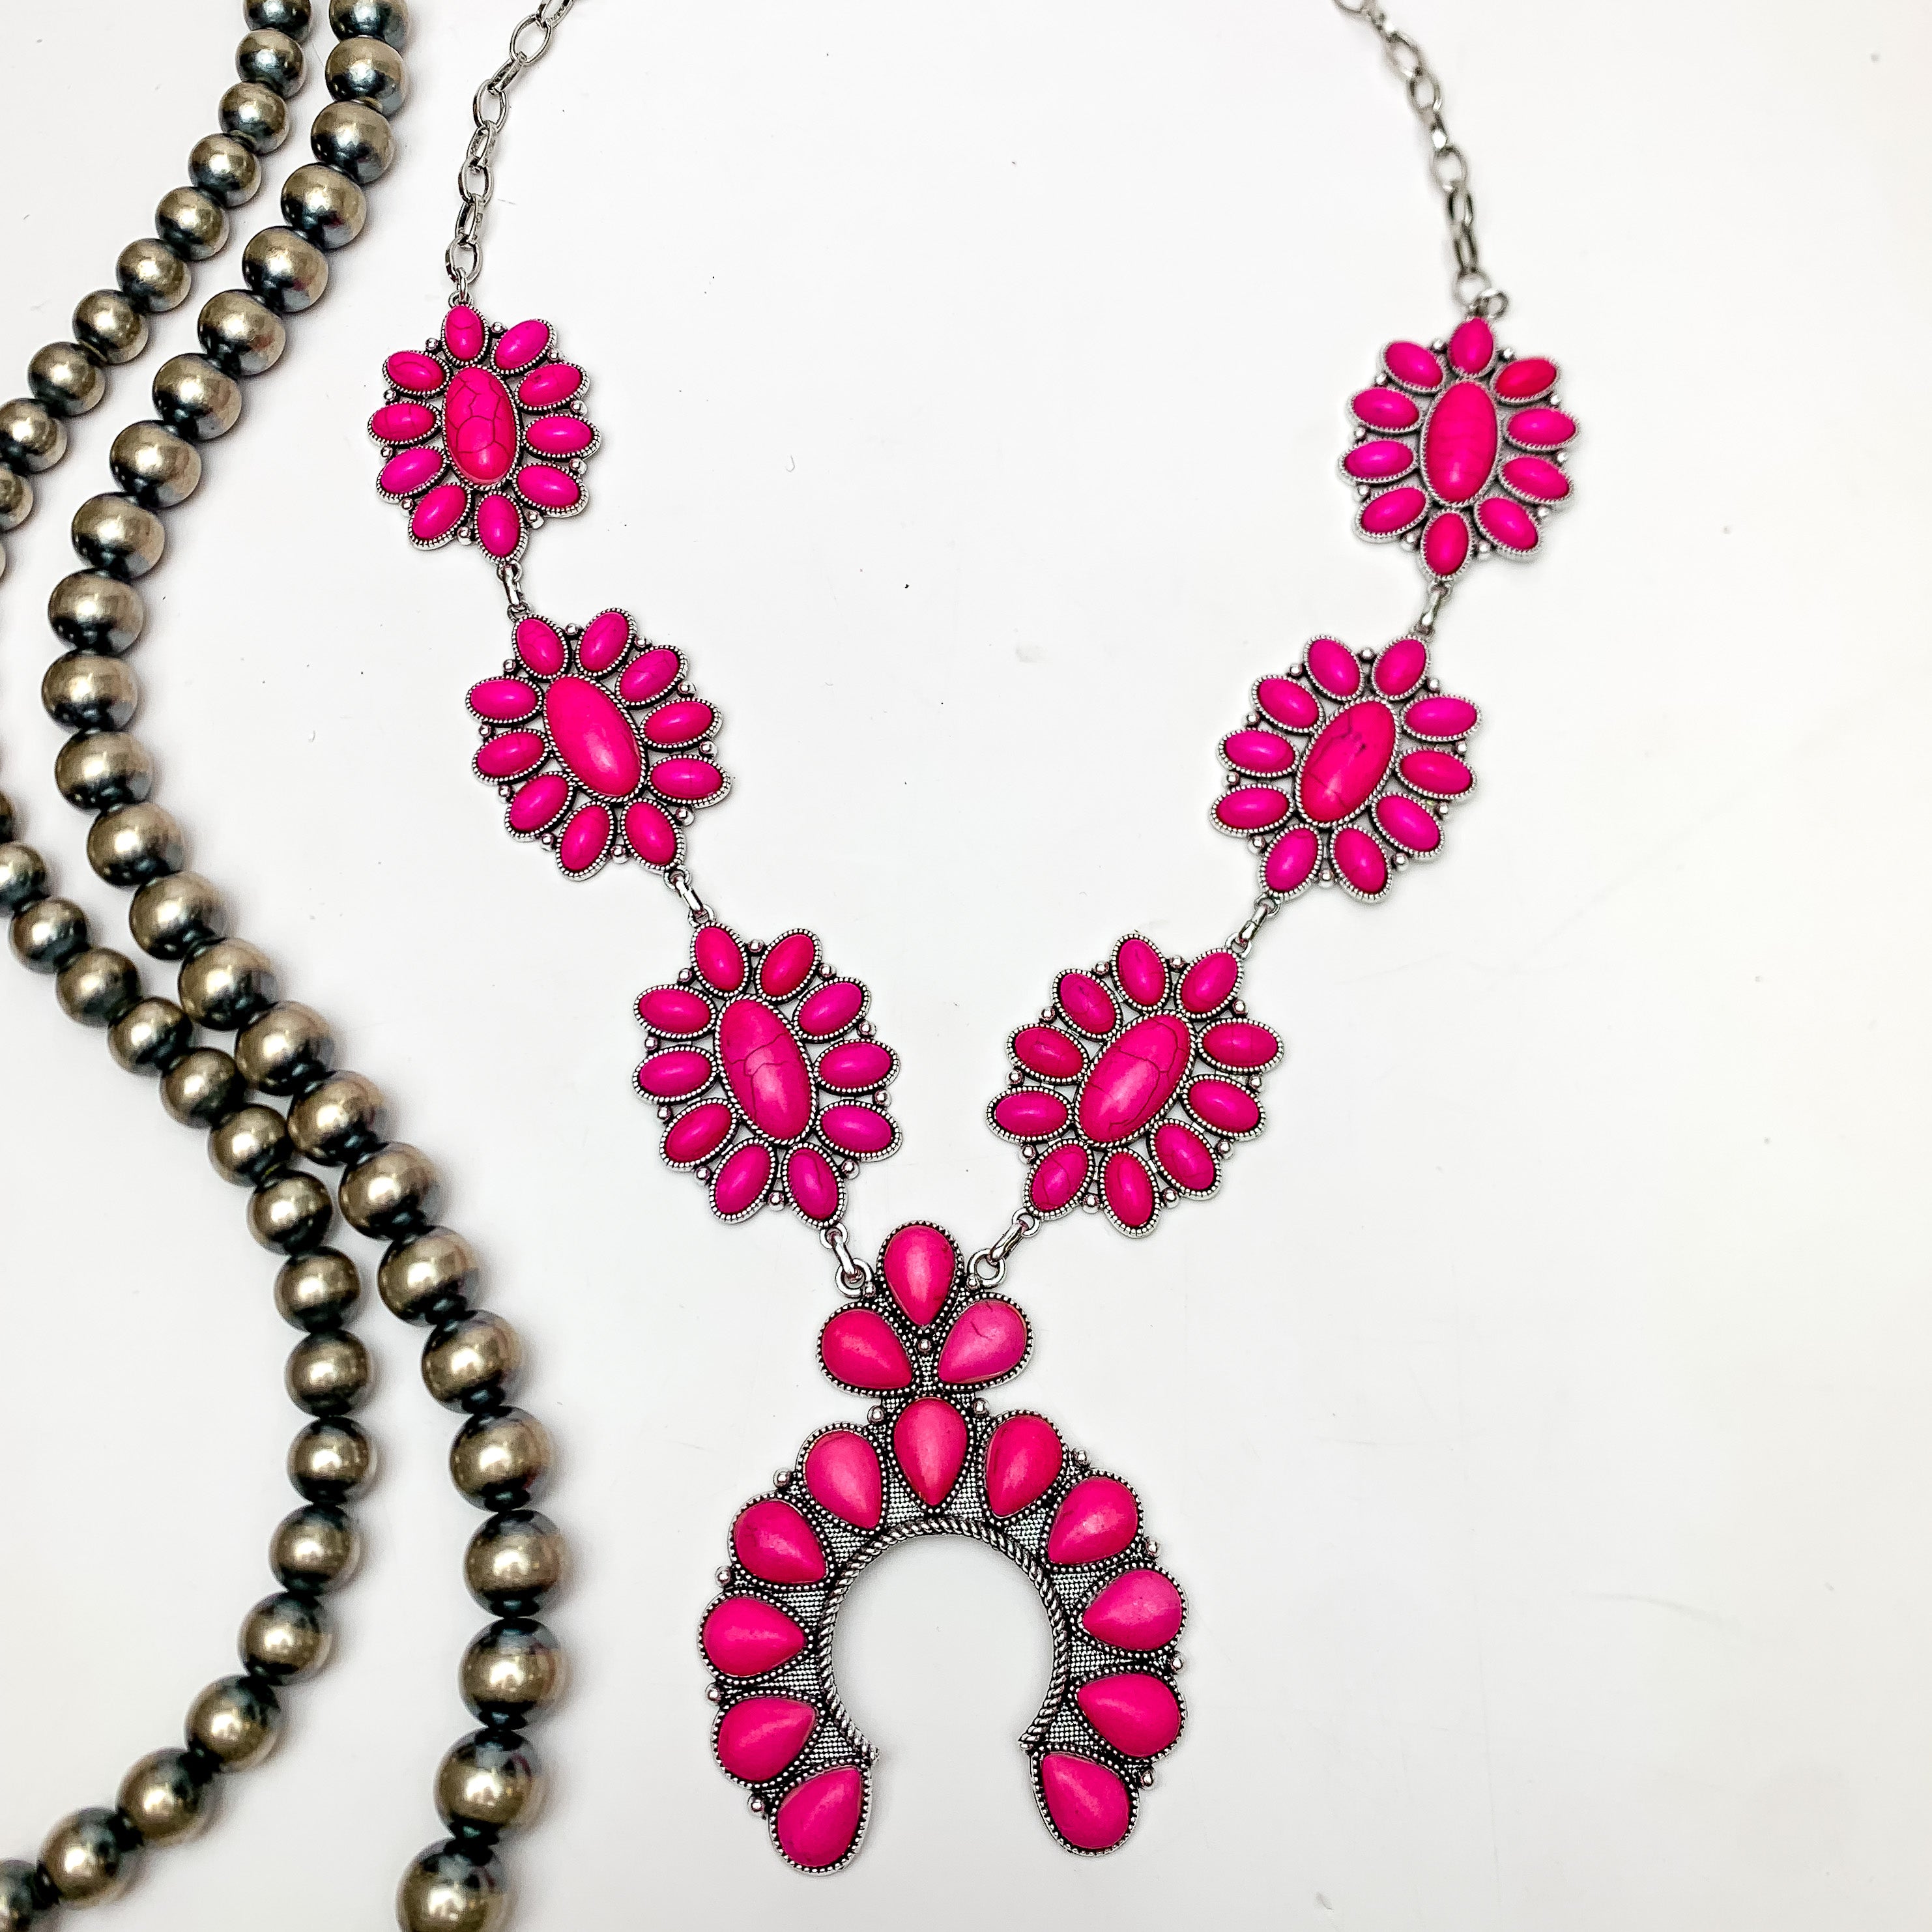 Squash Necklace with Oval Flowers in Silver Tone and fuchsia pink. This necklace is pictured on a white background with Navajo pearls on the left side.